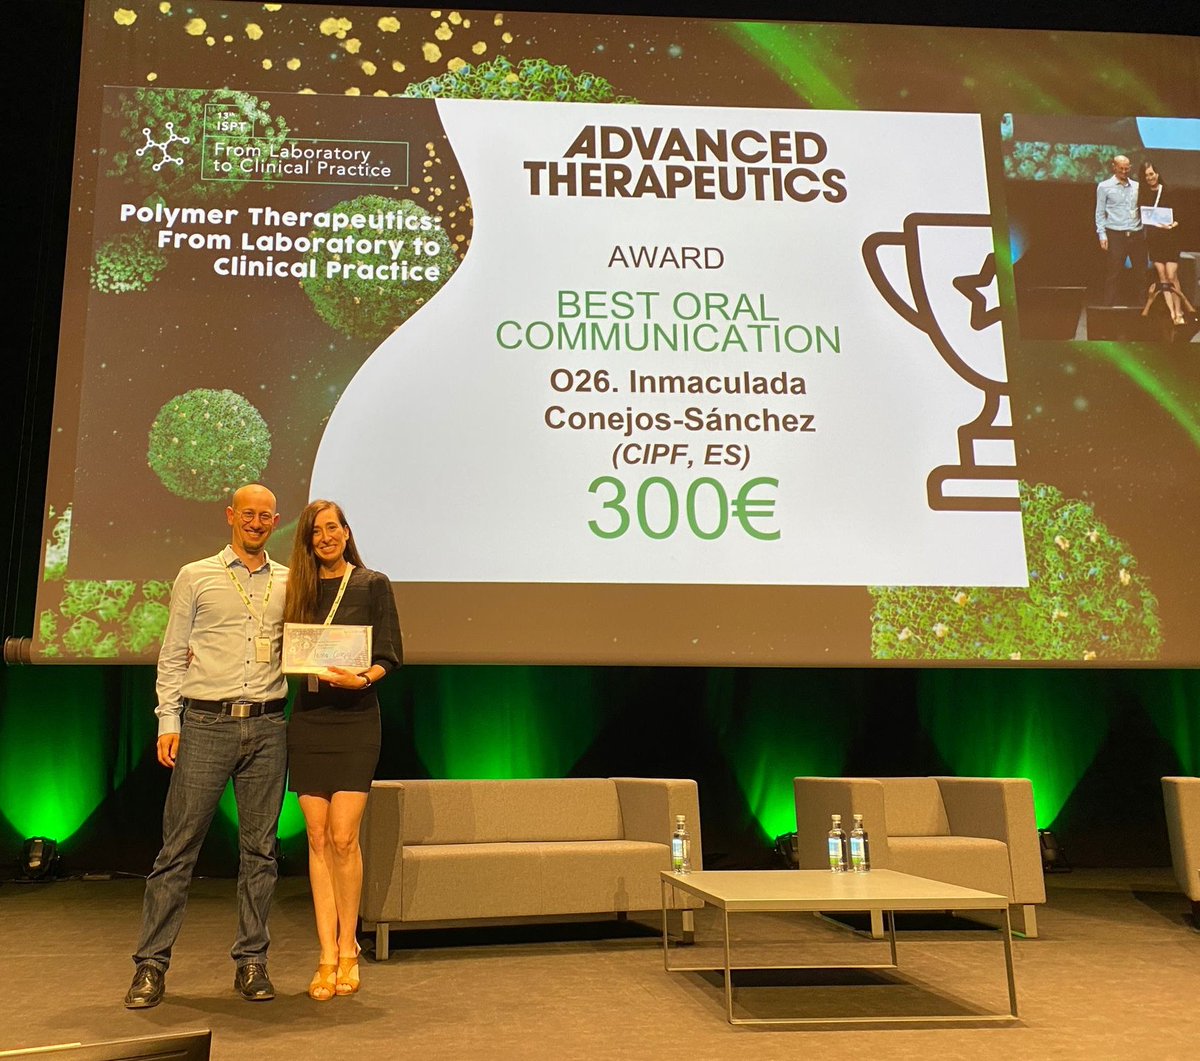 Still with a huge emotional hangover from the #ISPT2022... I can't believe I won the Best Oral Communication price! Enourmously thankful for this honor. We are a the Best Team @EstherMasia7 @VicentPTLab @CIPFciencia. Thanks also to @AdvSciNews @Wiley_Chemistry !!!